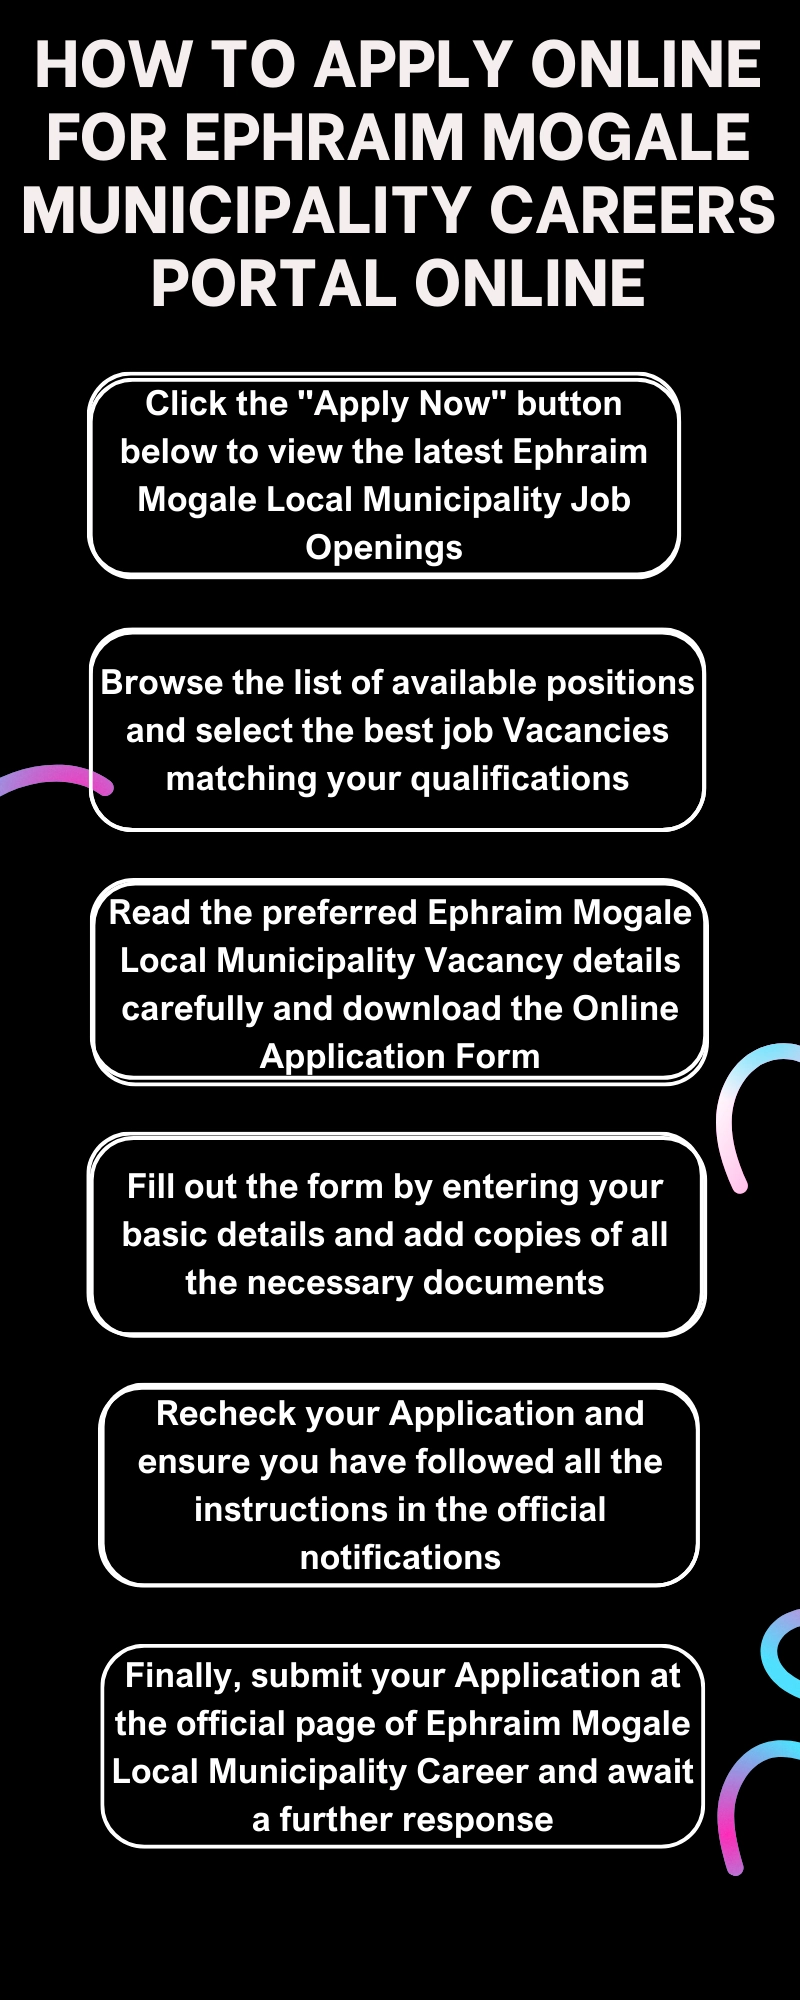 How to Apply online for Ephraim Mogale Municipality Careers Portal Online